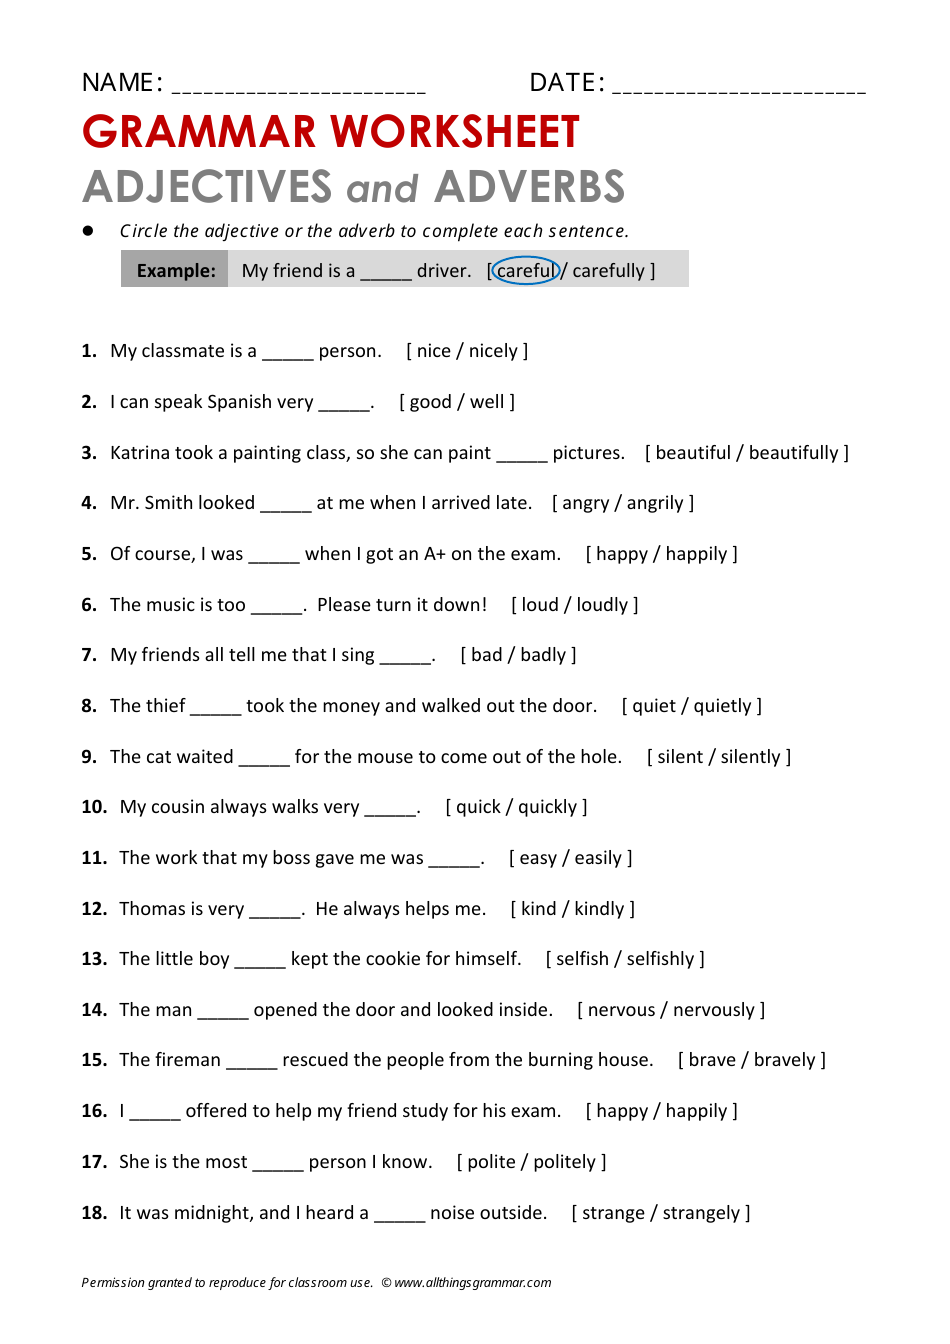 English Grammar Worksheet - Adjectives and Adverbs, Page 1